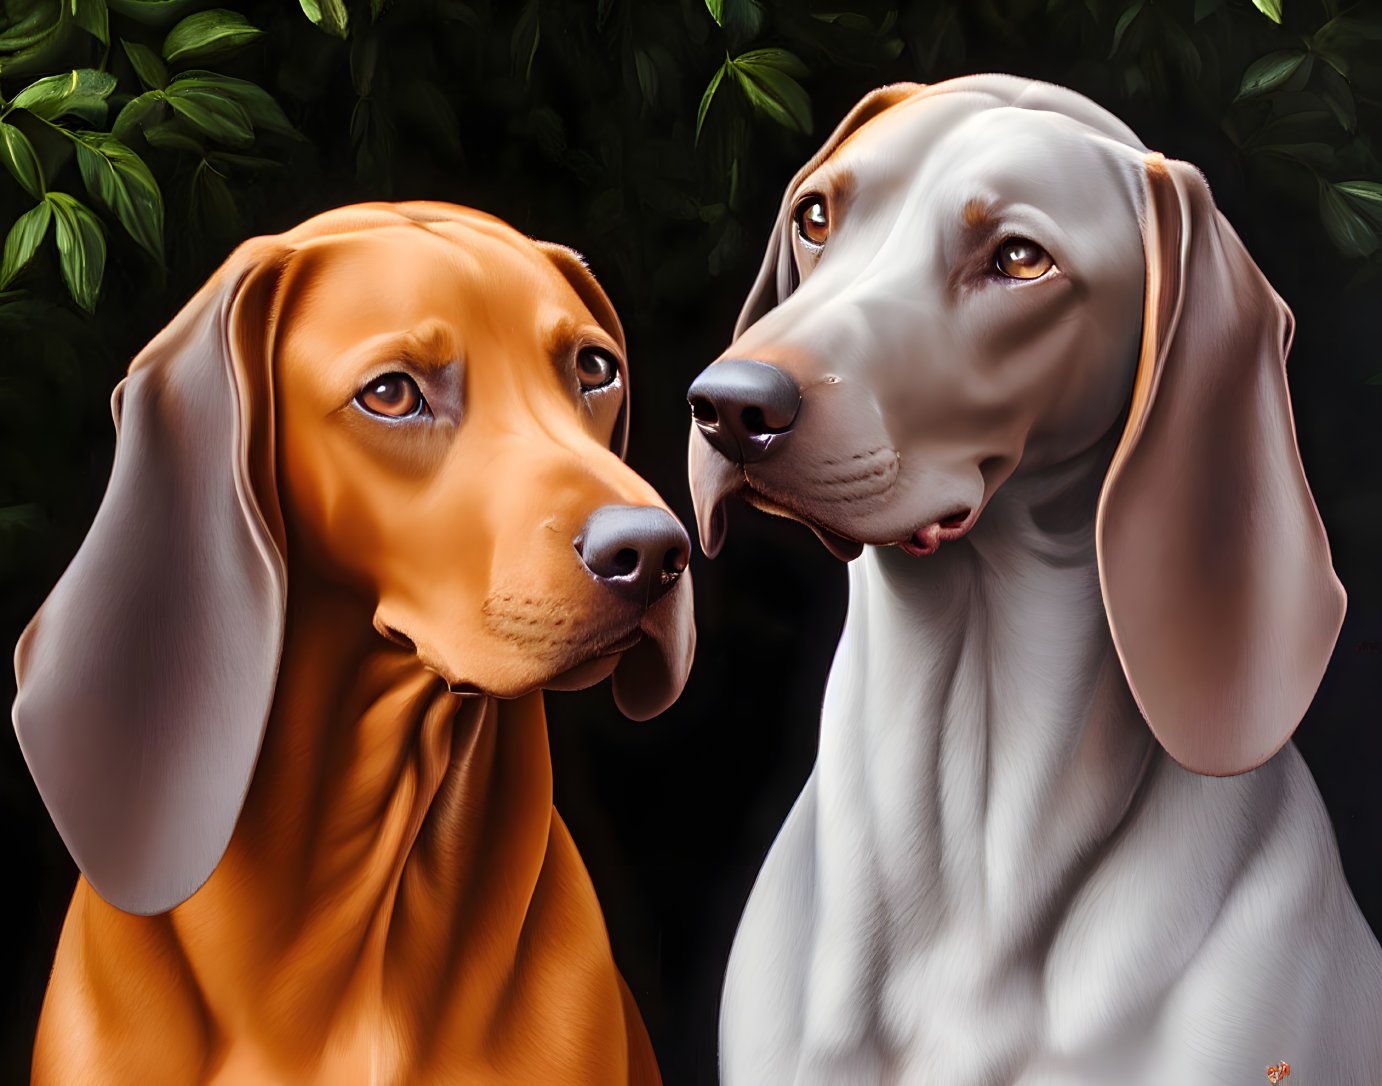 Two glossy-coated hound dogs, one brown and one white with brown patches, against a dark